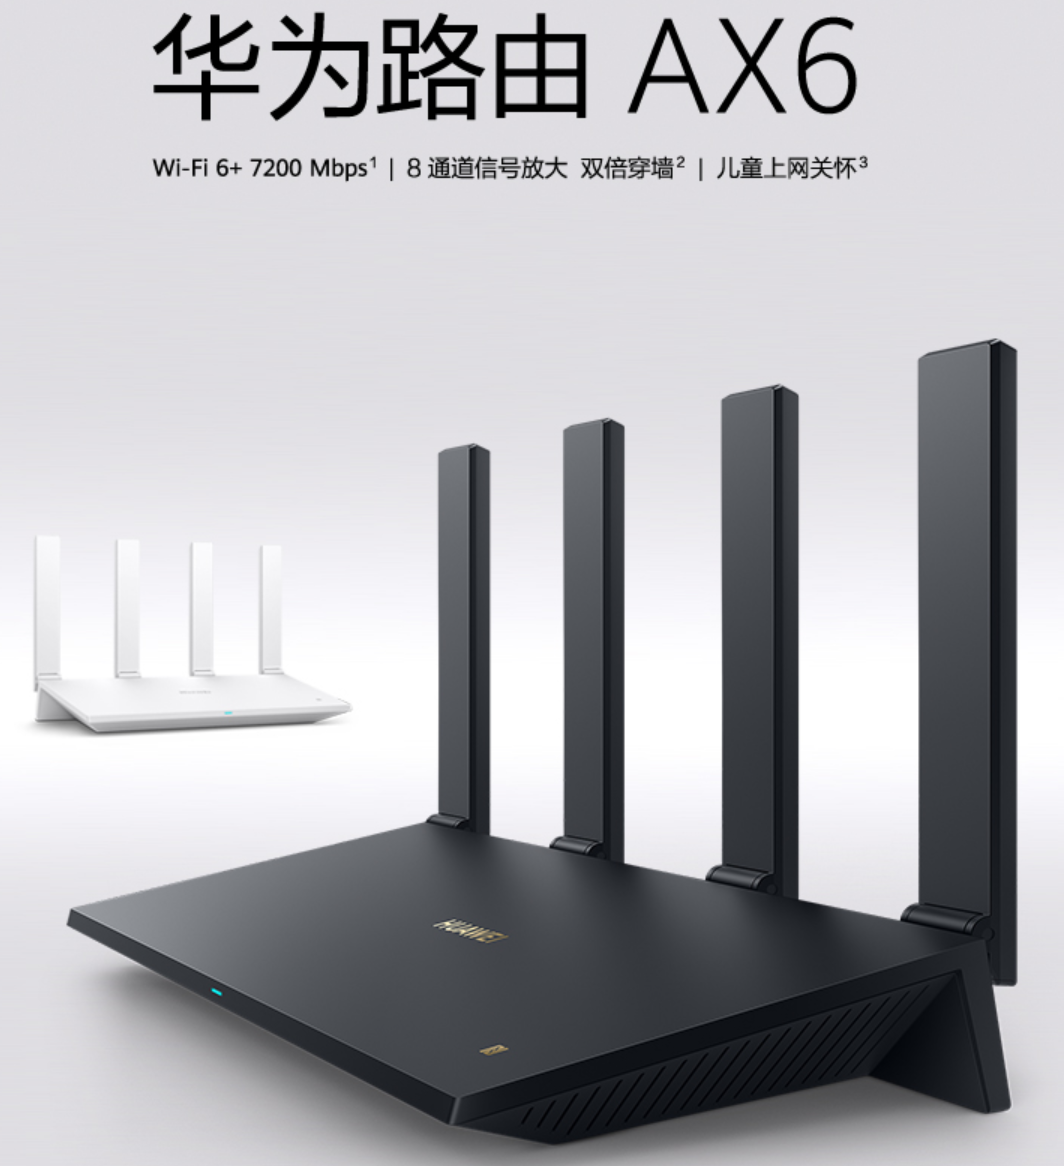 Huawei Router AX6